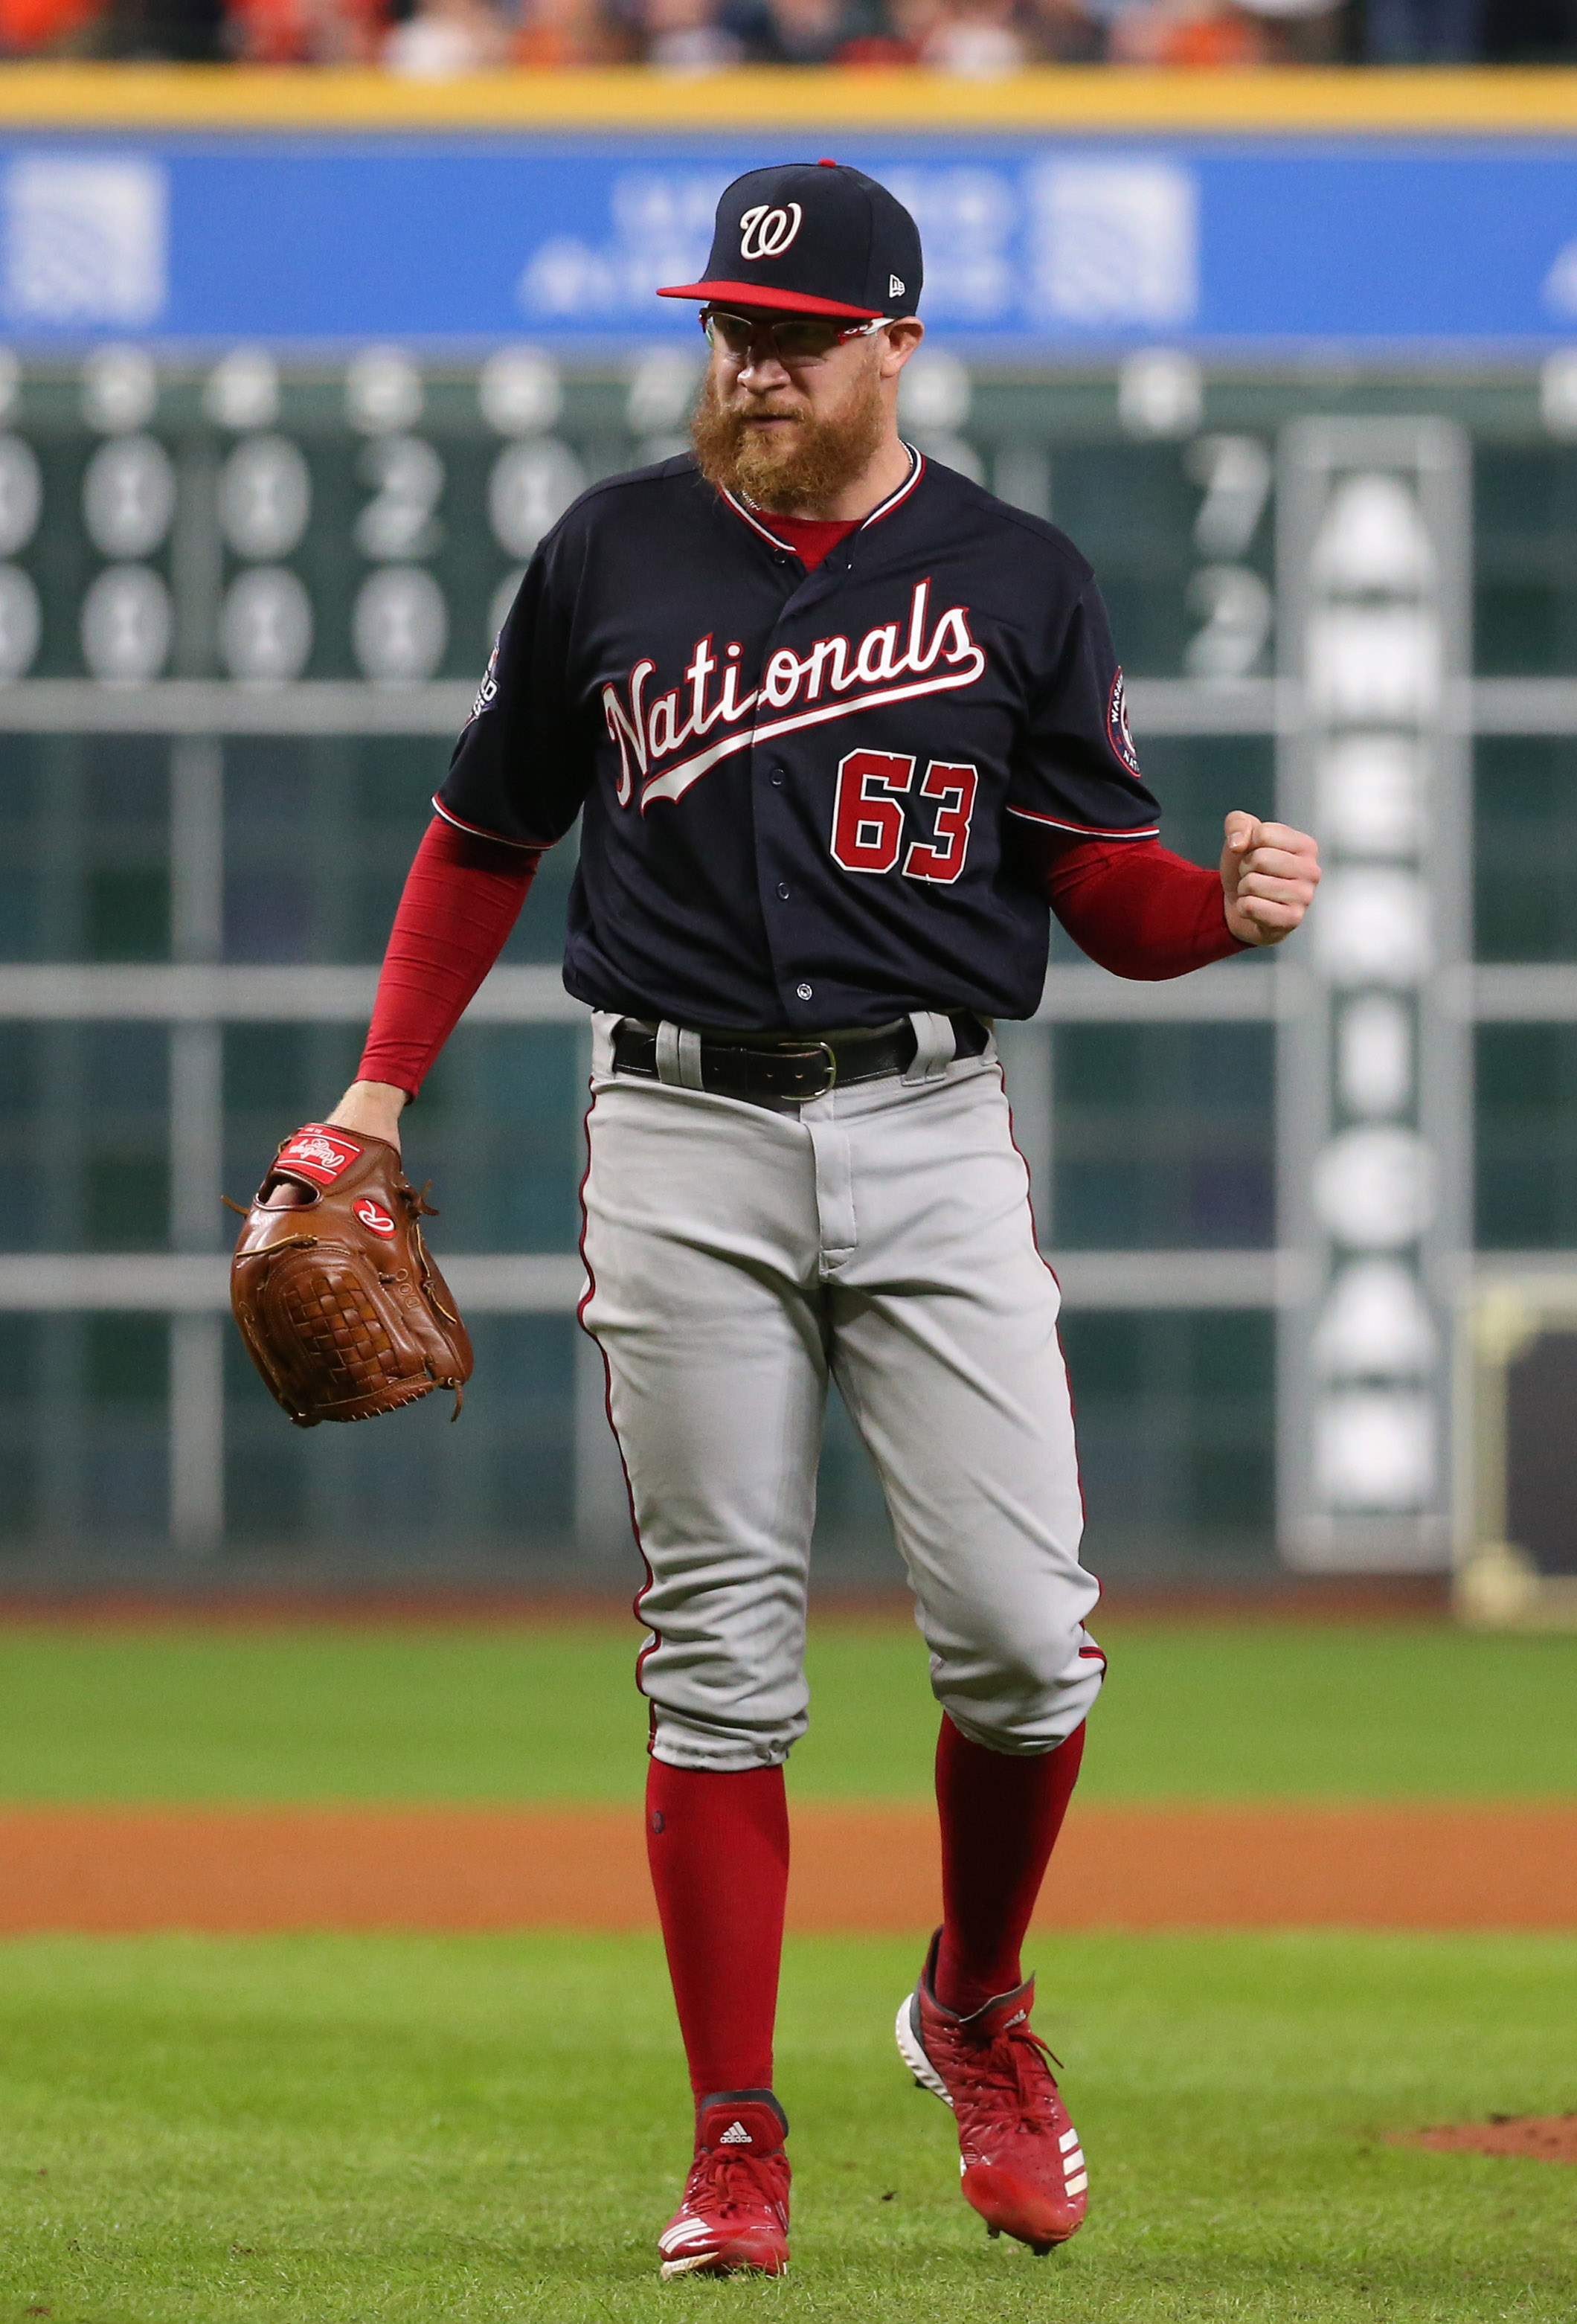 The Reds sign LHP Sean Doolittle to a one-year deal for 2021  “The way  [the Reds] are developing guys, the way they are using data, the way they  are using analytics